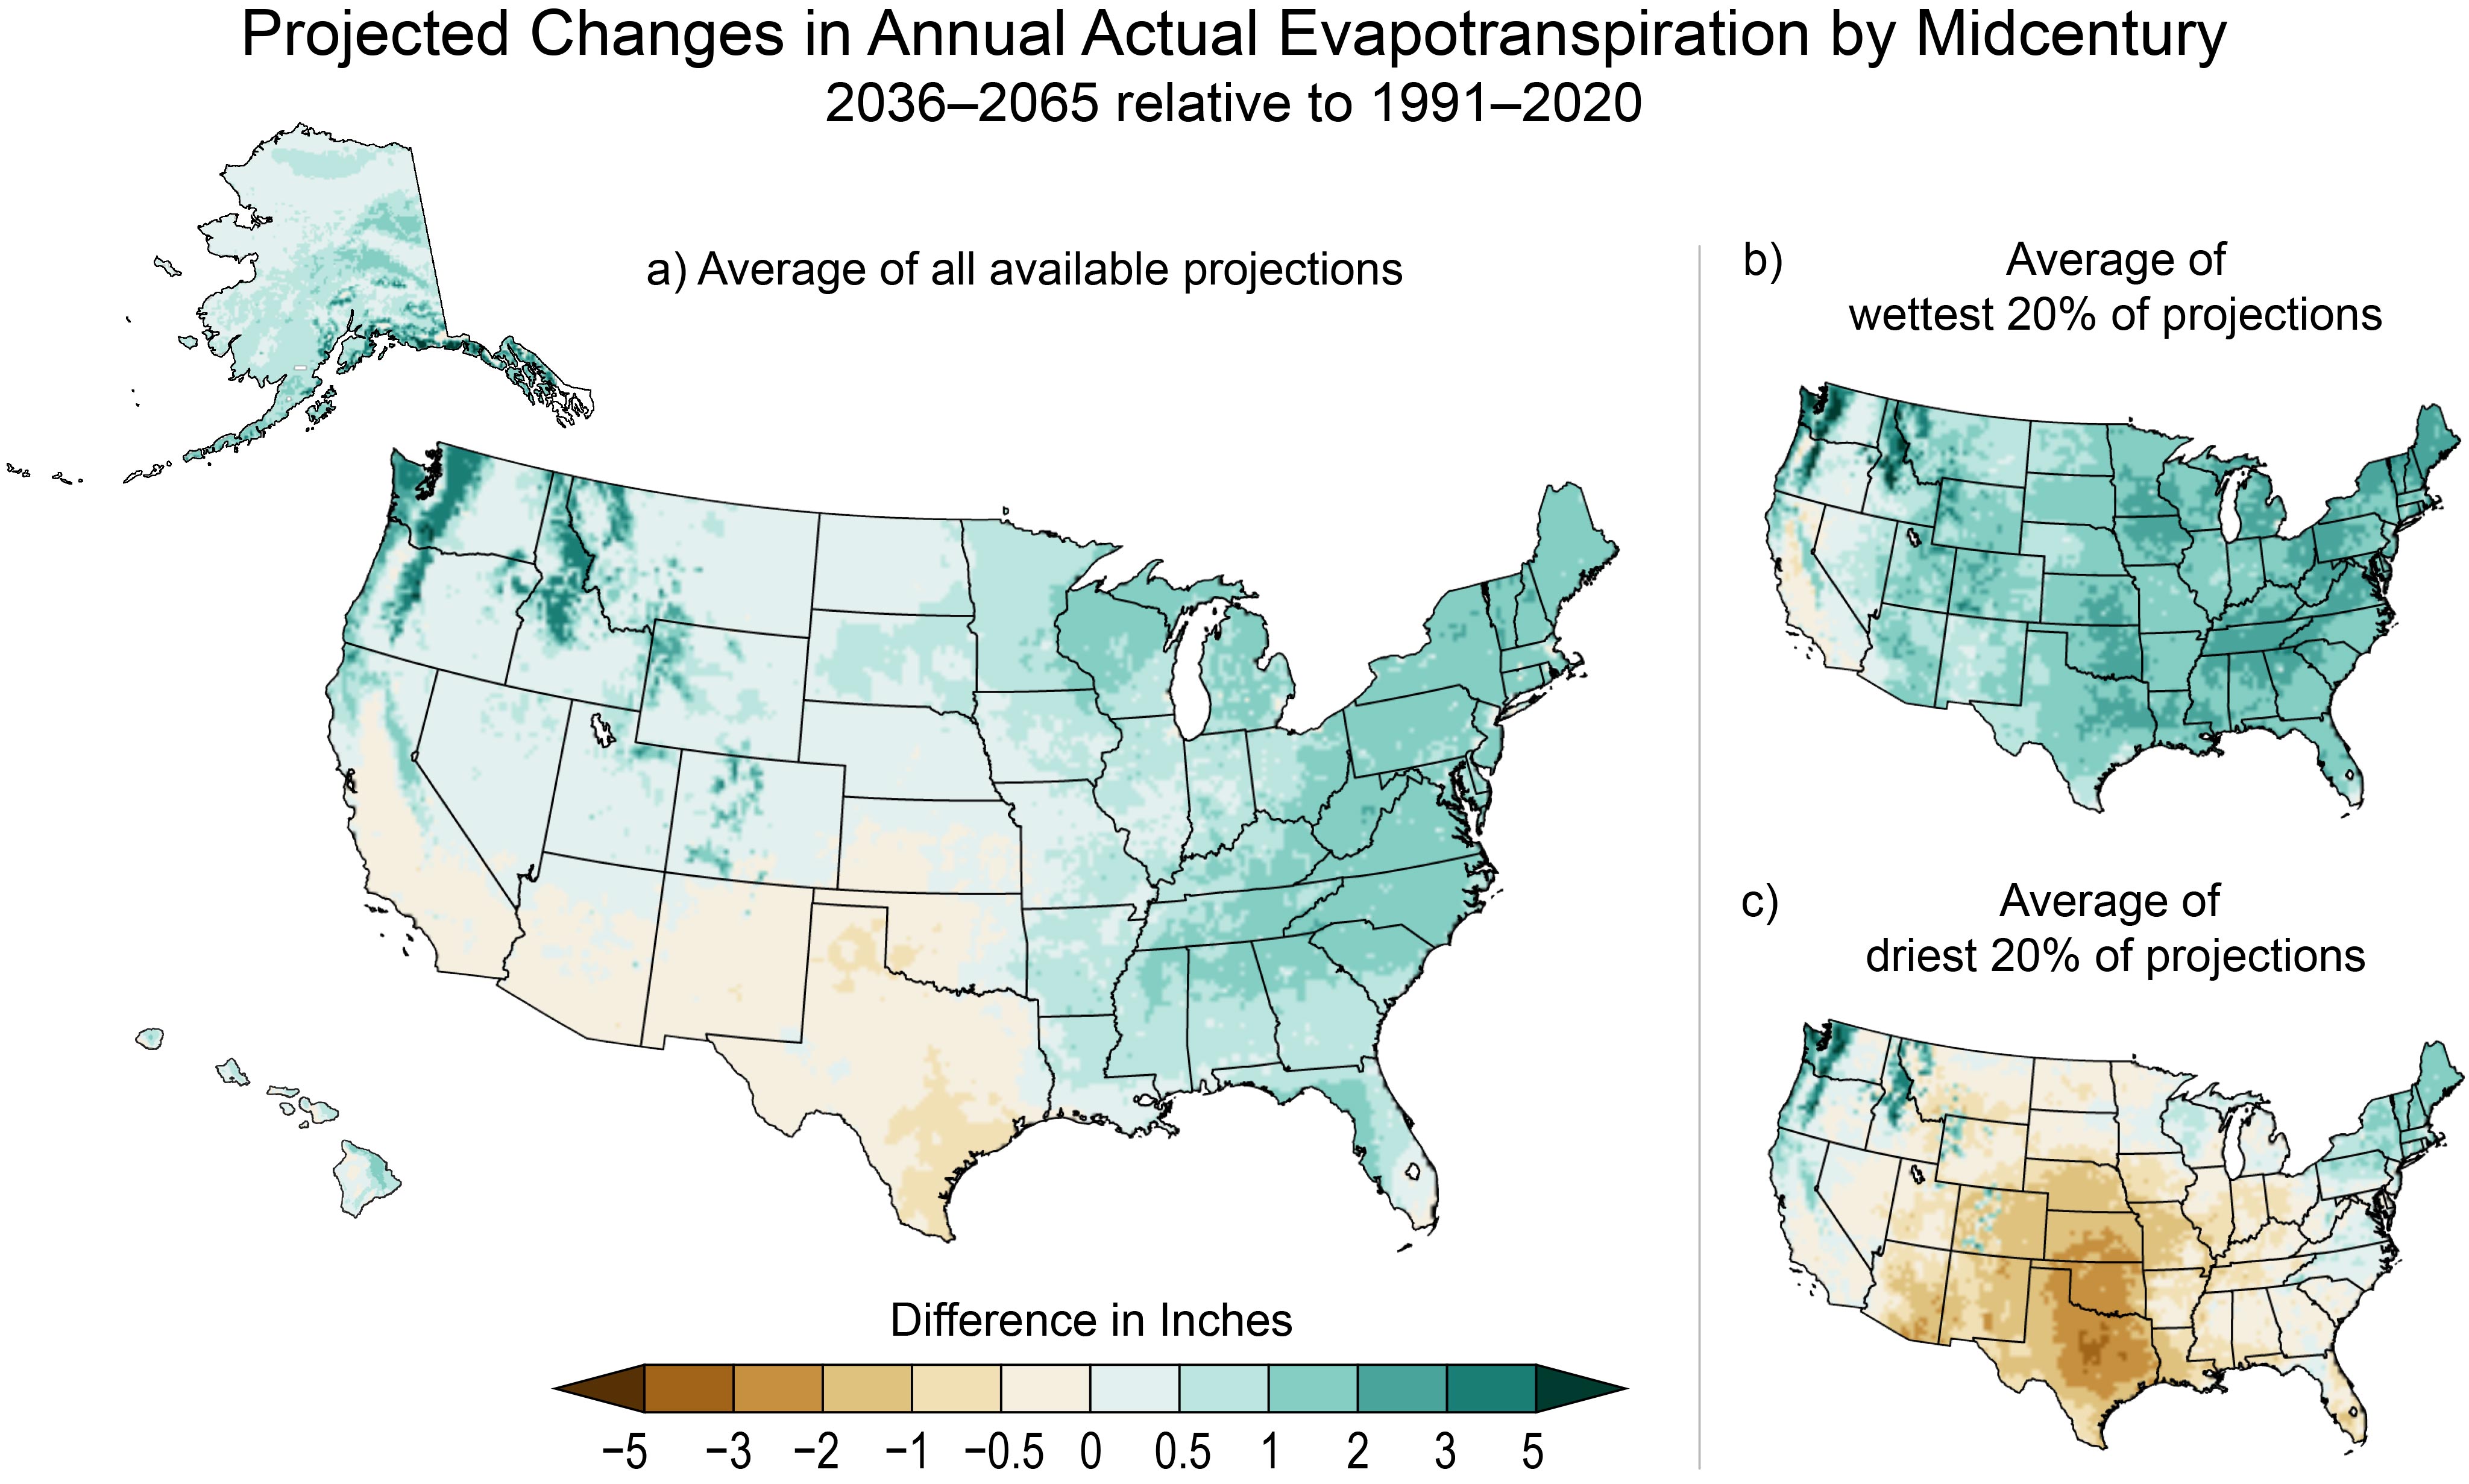 Projected Changes in Annual Actual Evapotranspiration by Midcentury